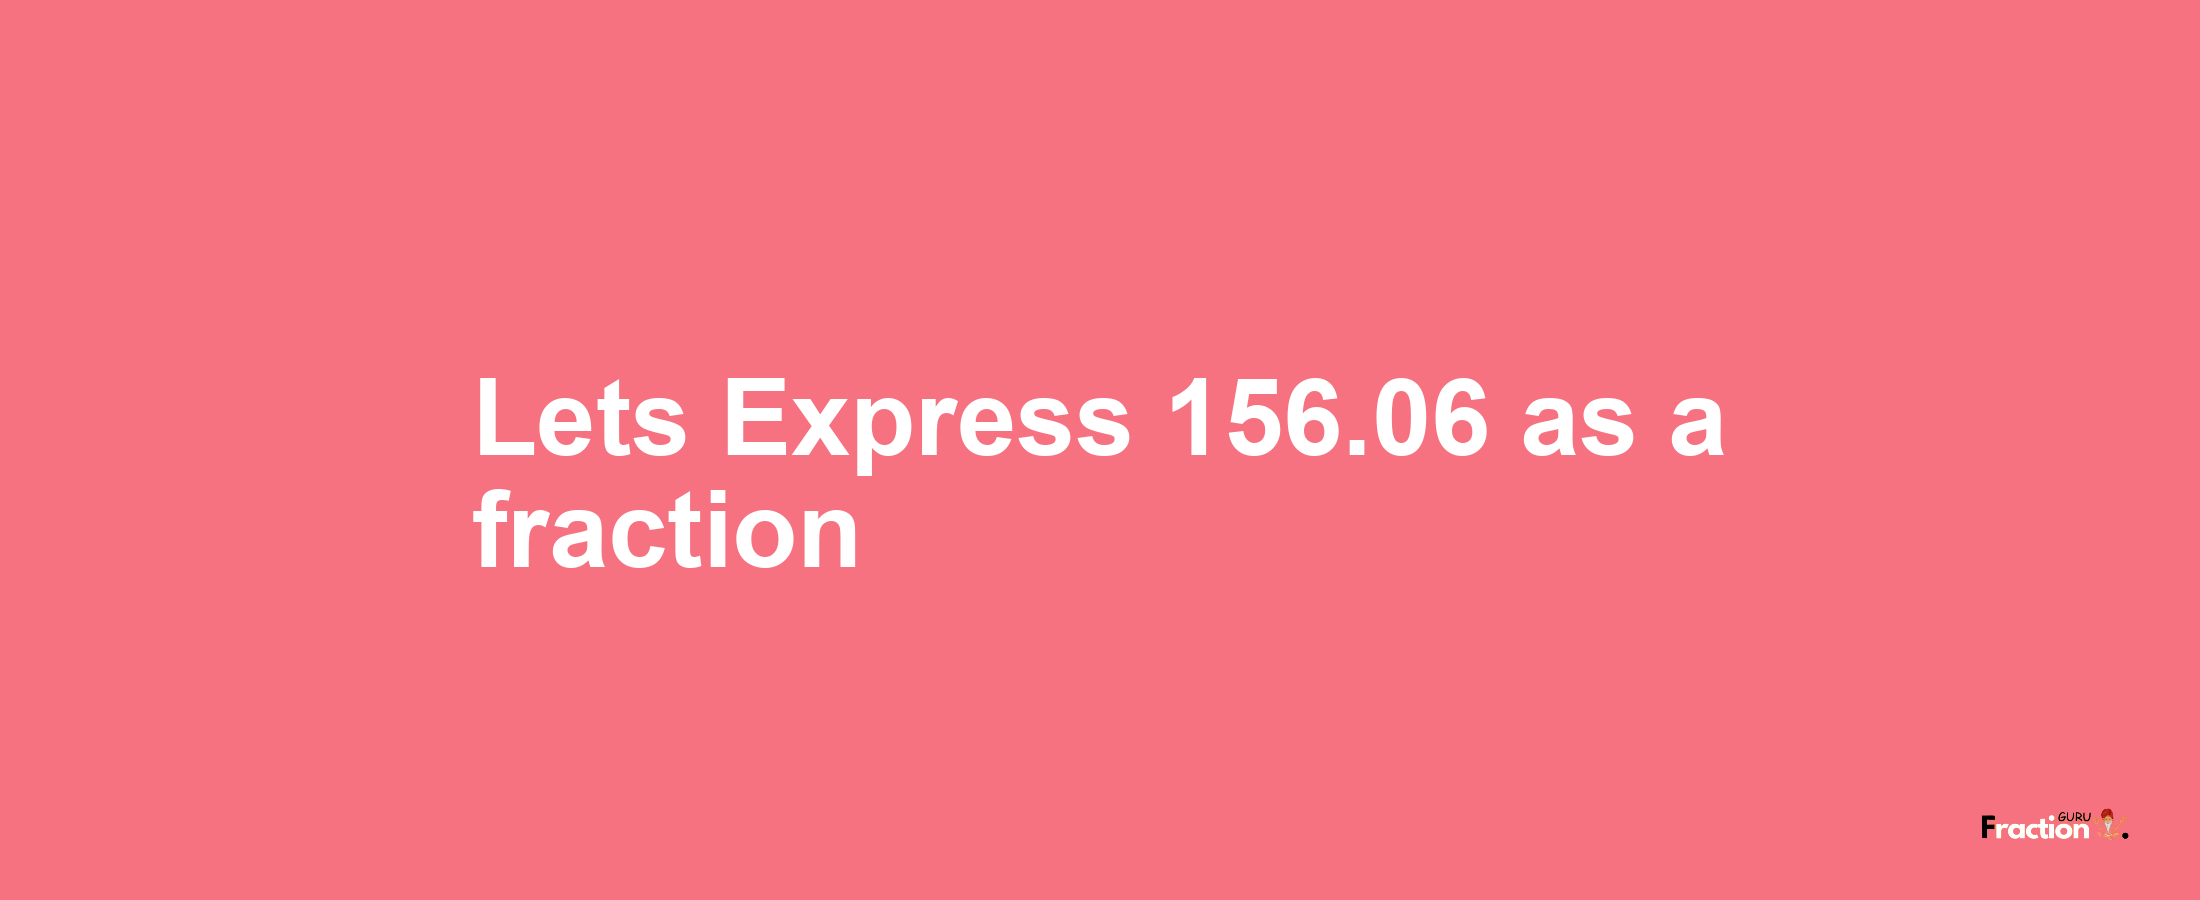 Lets Express 156.06 as afraction